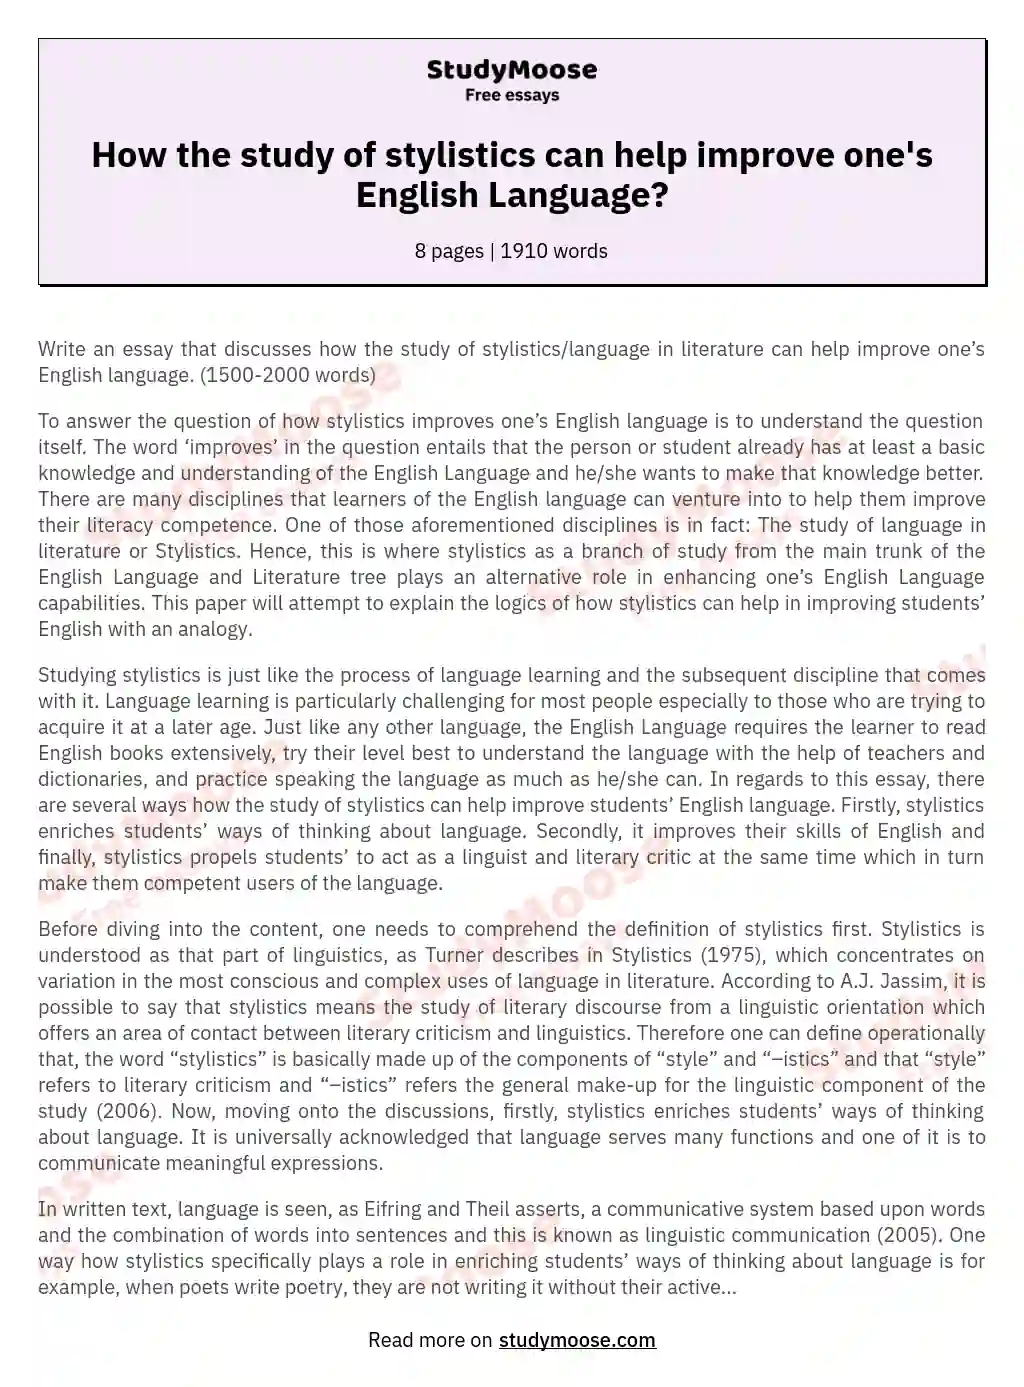 How the study of stylistics can help improve one's English Language? essay